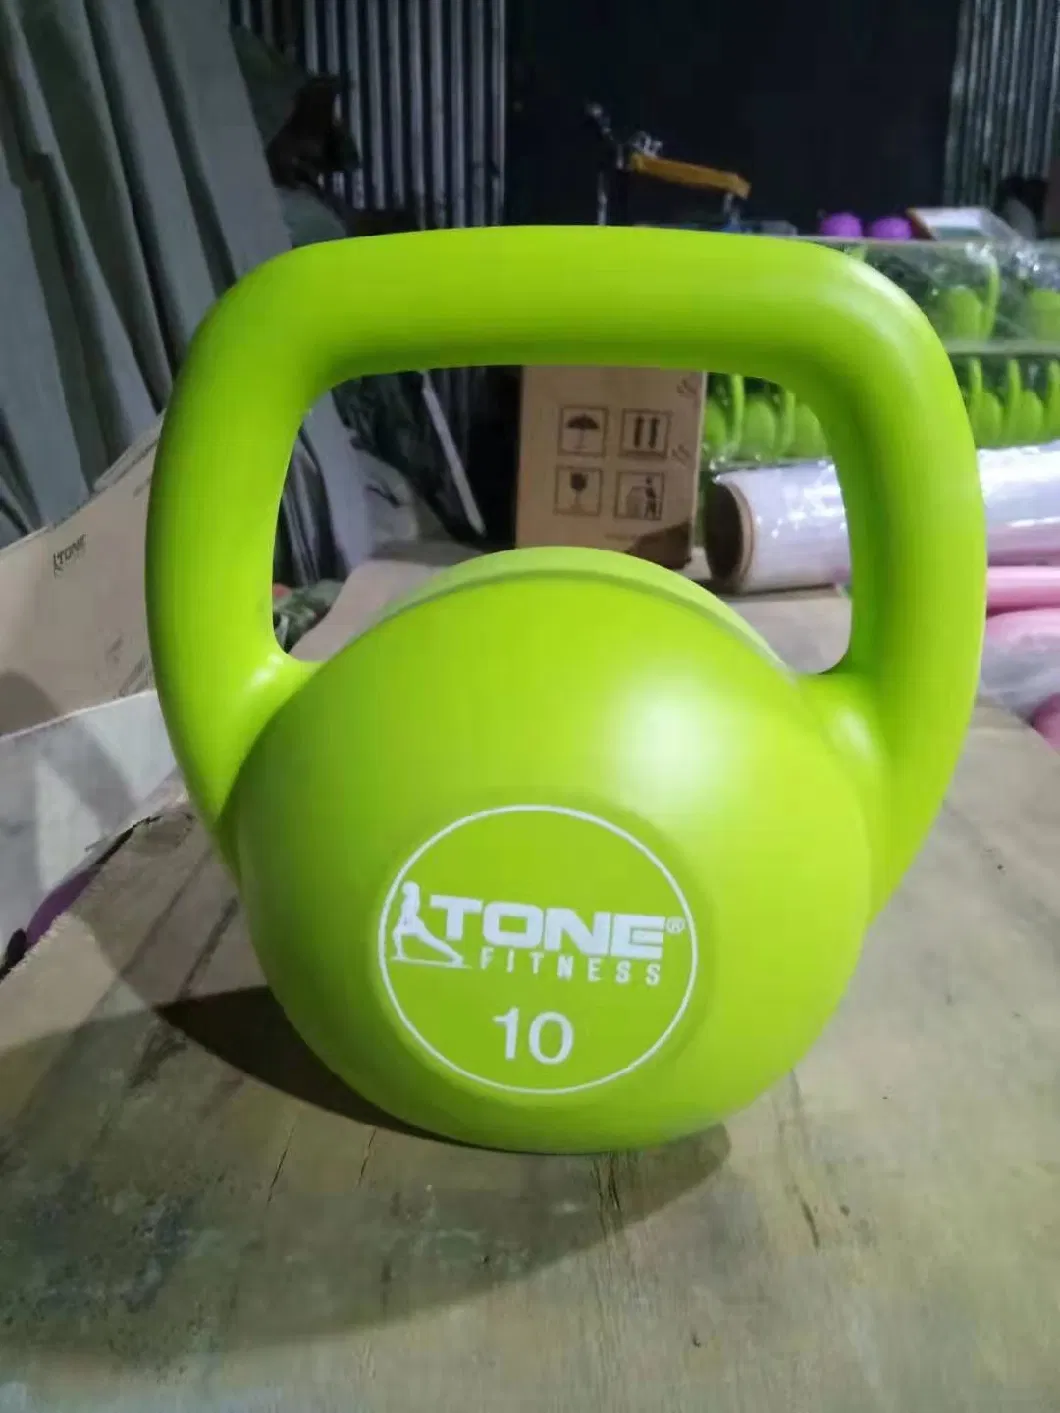 Top Grade Custom Logo Color Weight Competition Steel Kettlebell